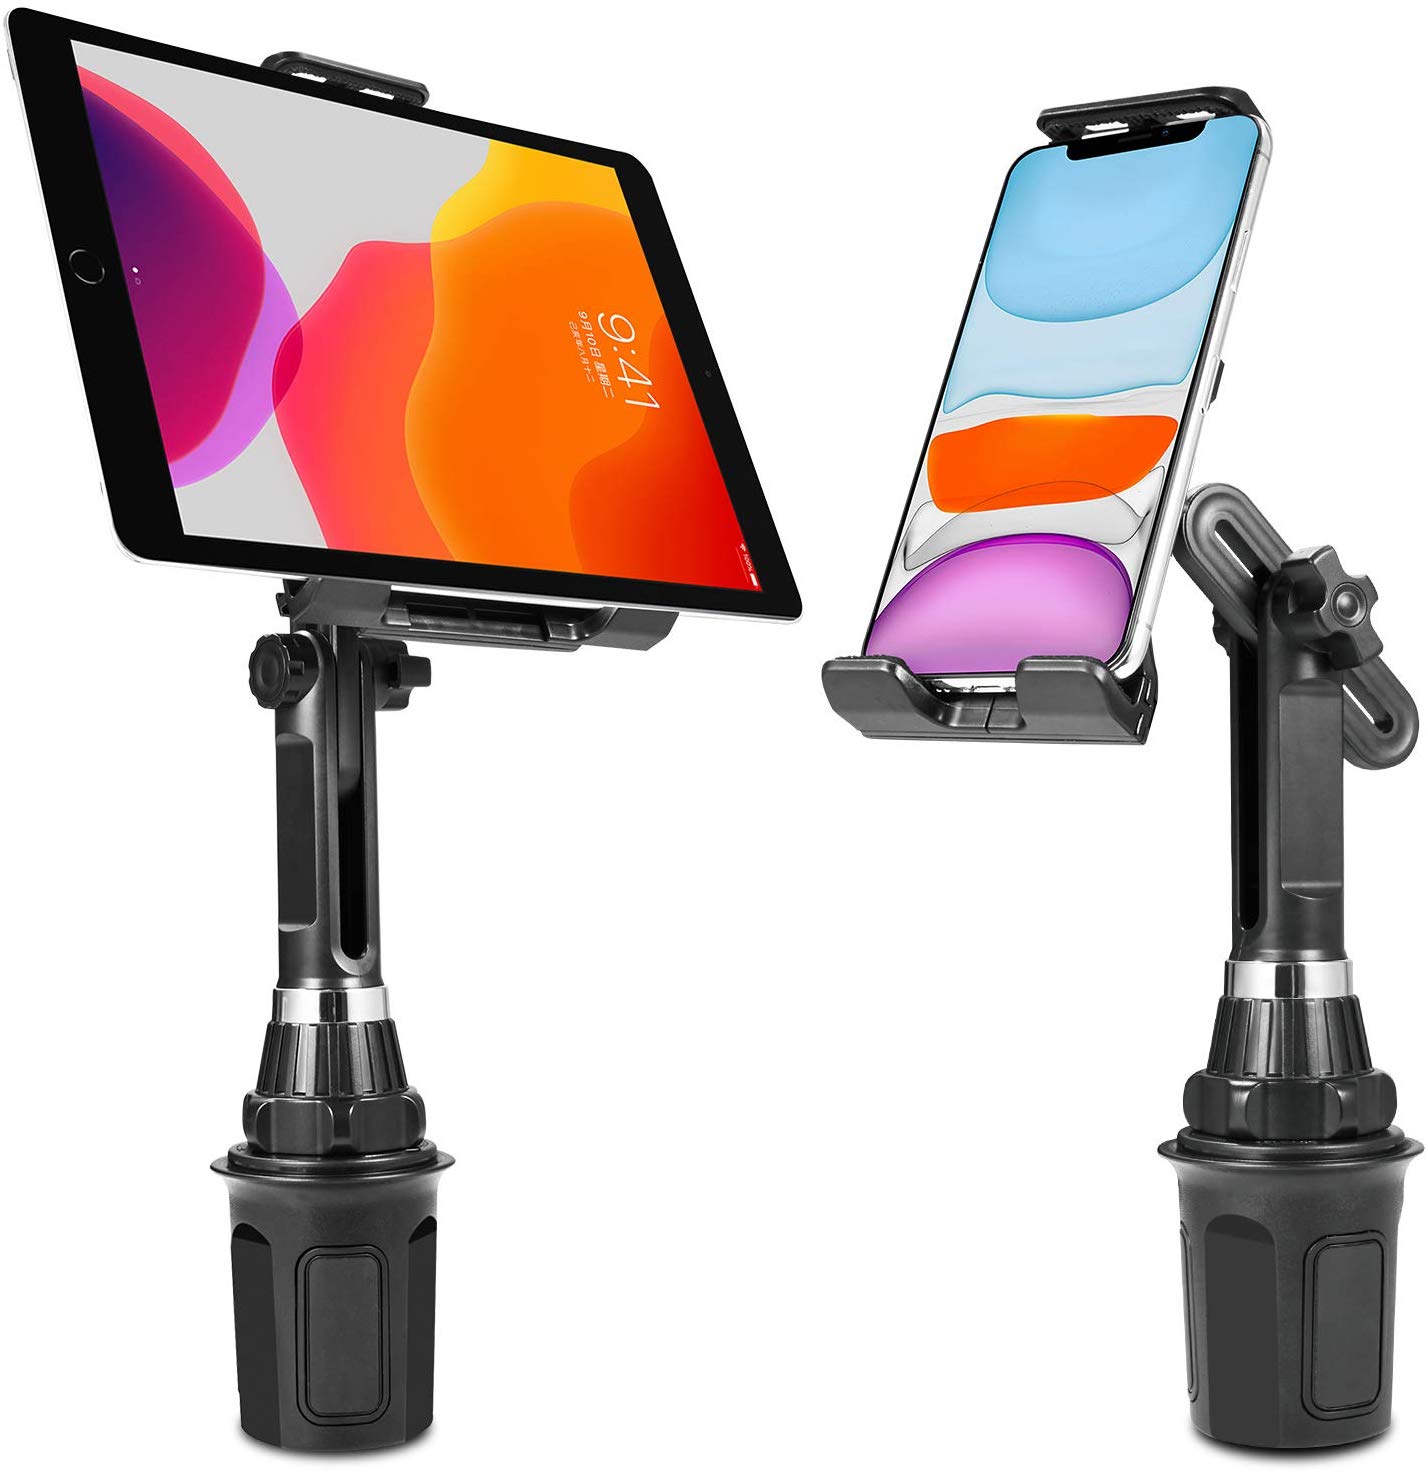 LUXMO Car Cup Holder Phone Mount, Universal Cell Phone Holder Mount Cradle Compatible with iPhone Xs/Max/X/XR/ 8/8 Plus, Pad Air Mini,Samsung Note 9/ S10+/ S9/ S9+/ S8 - image 1 of 9